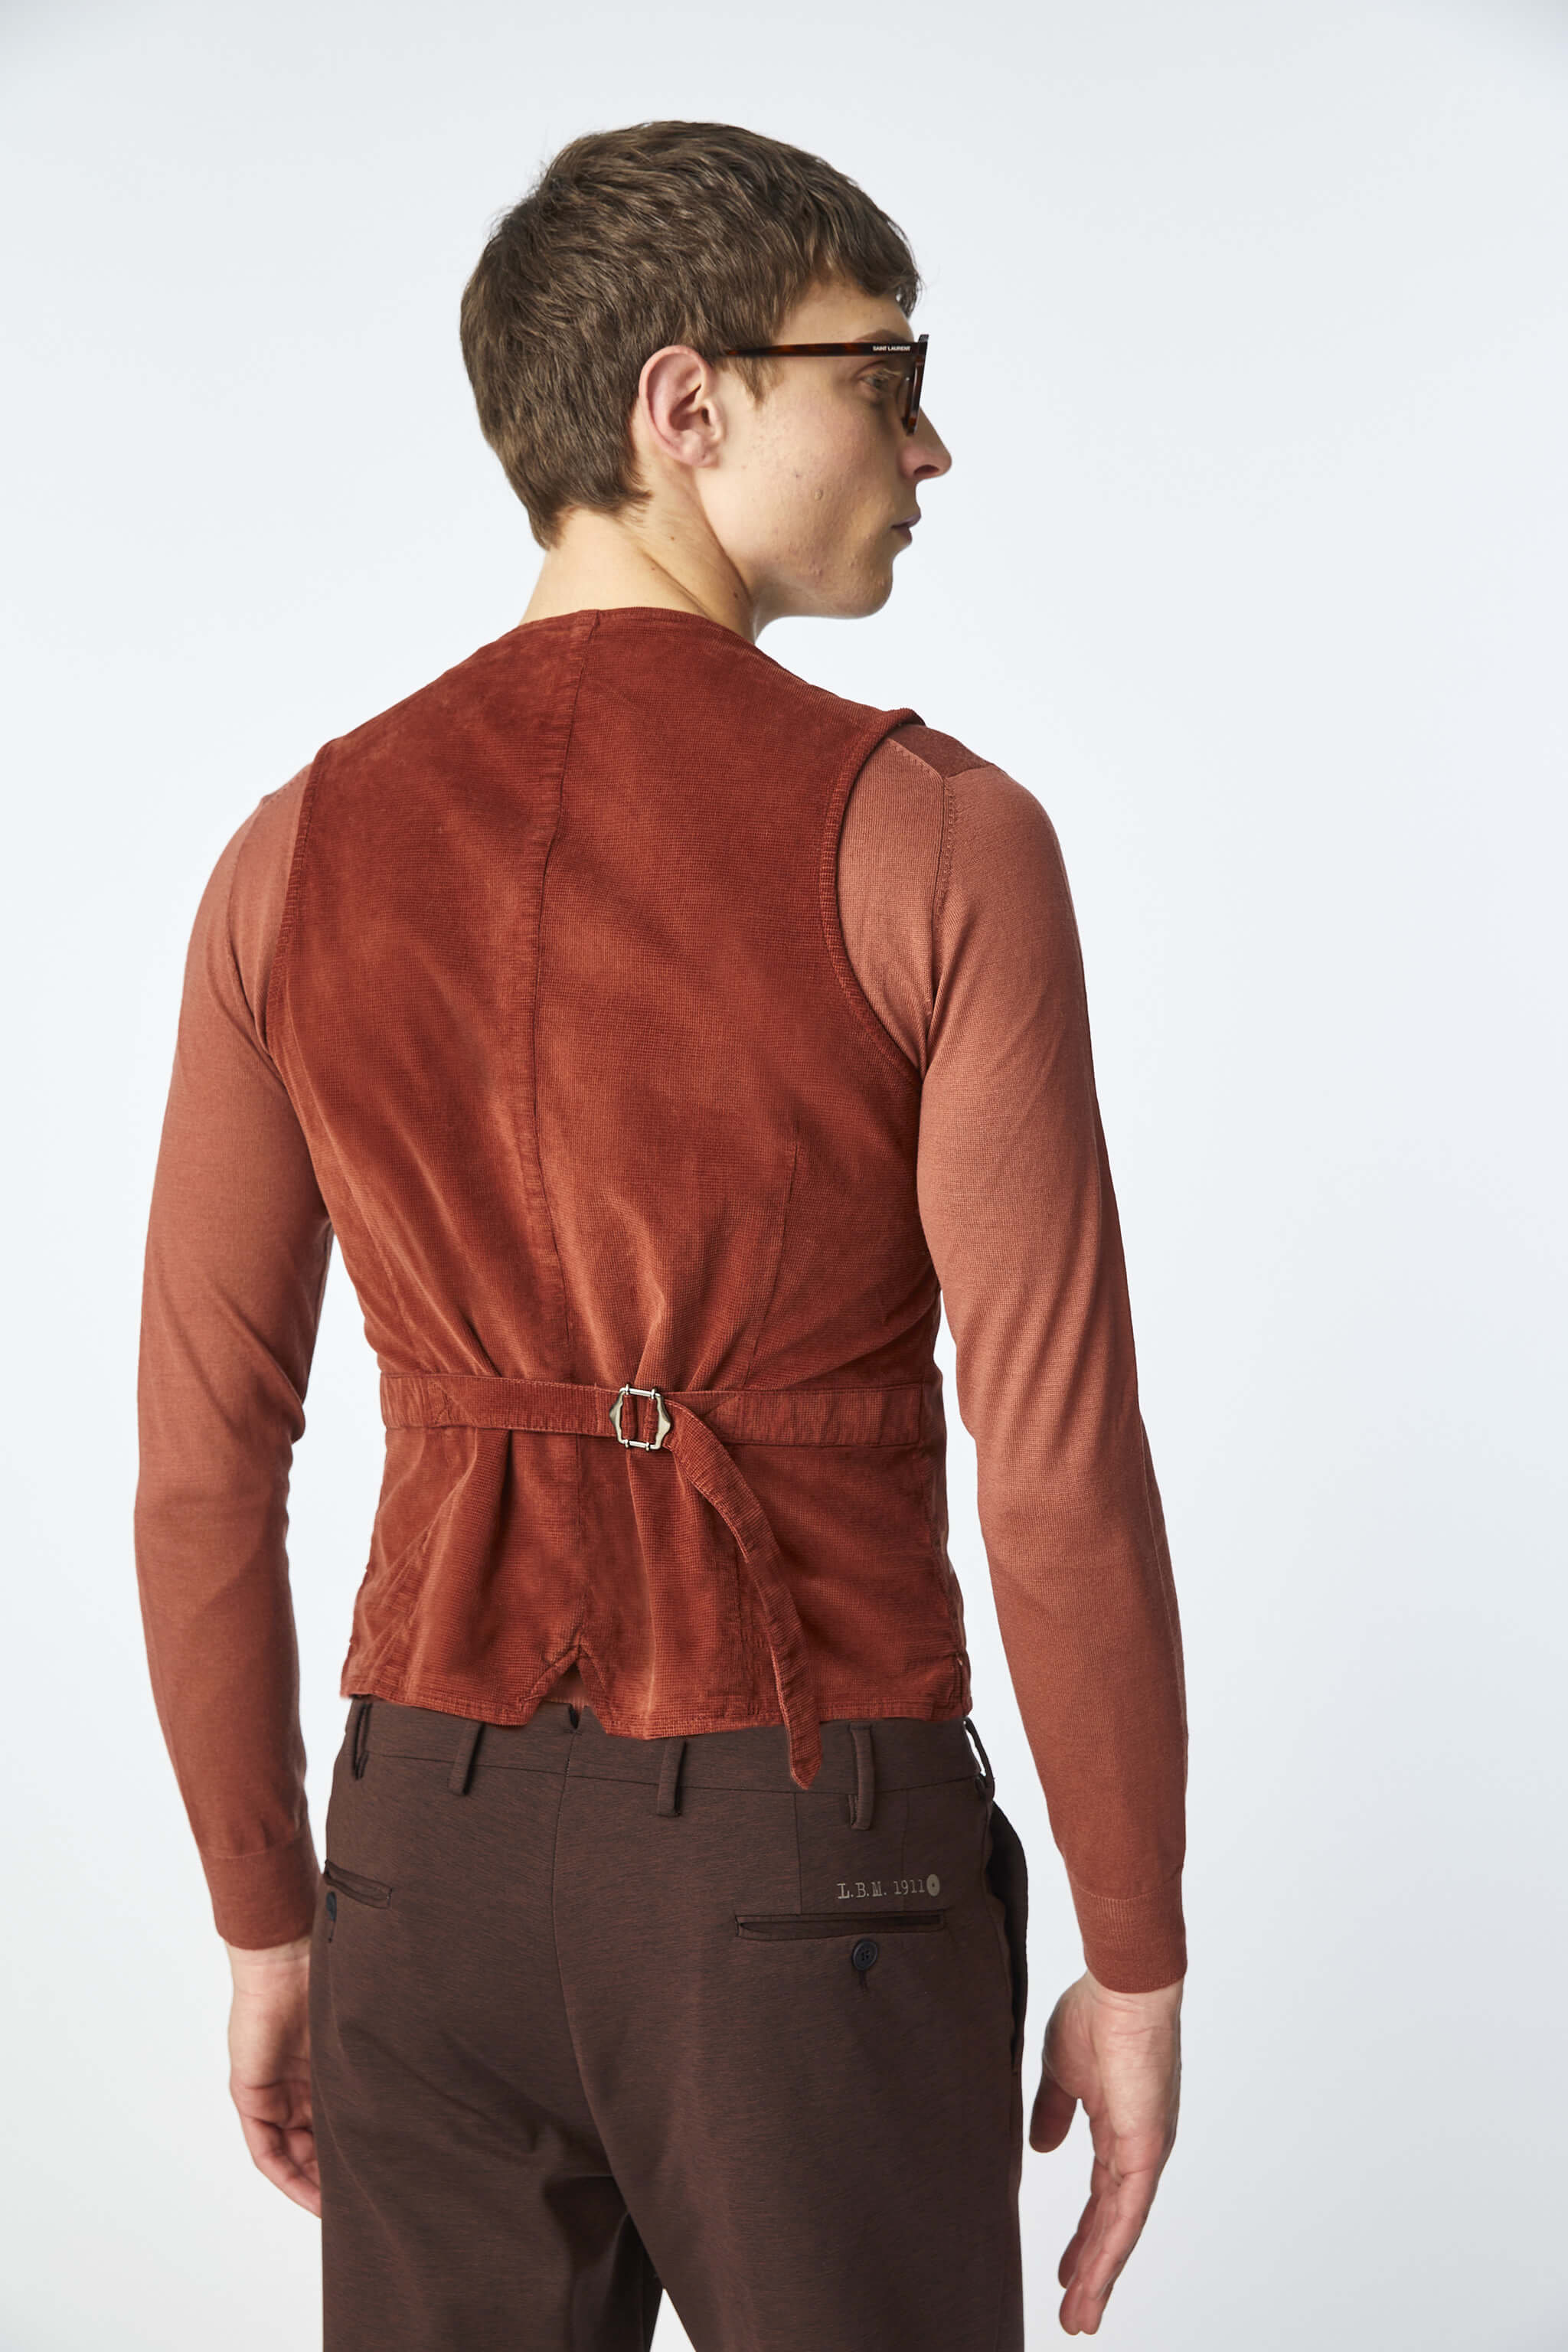 Garment-dyed MIKE waistcoat in Sienna